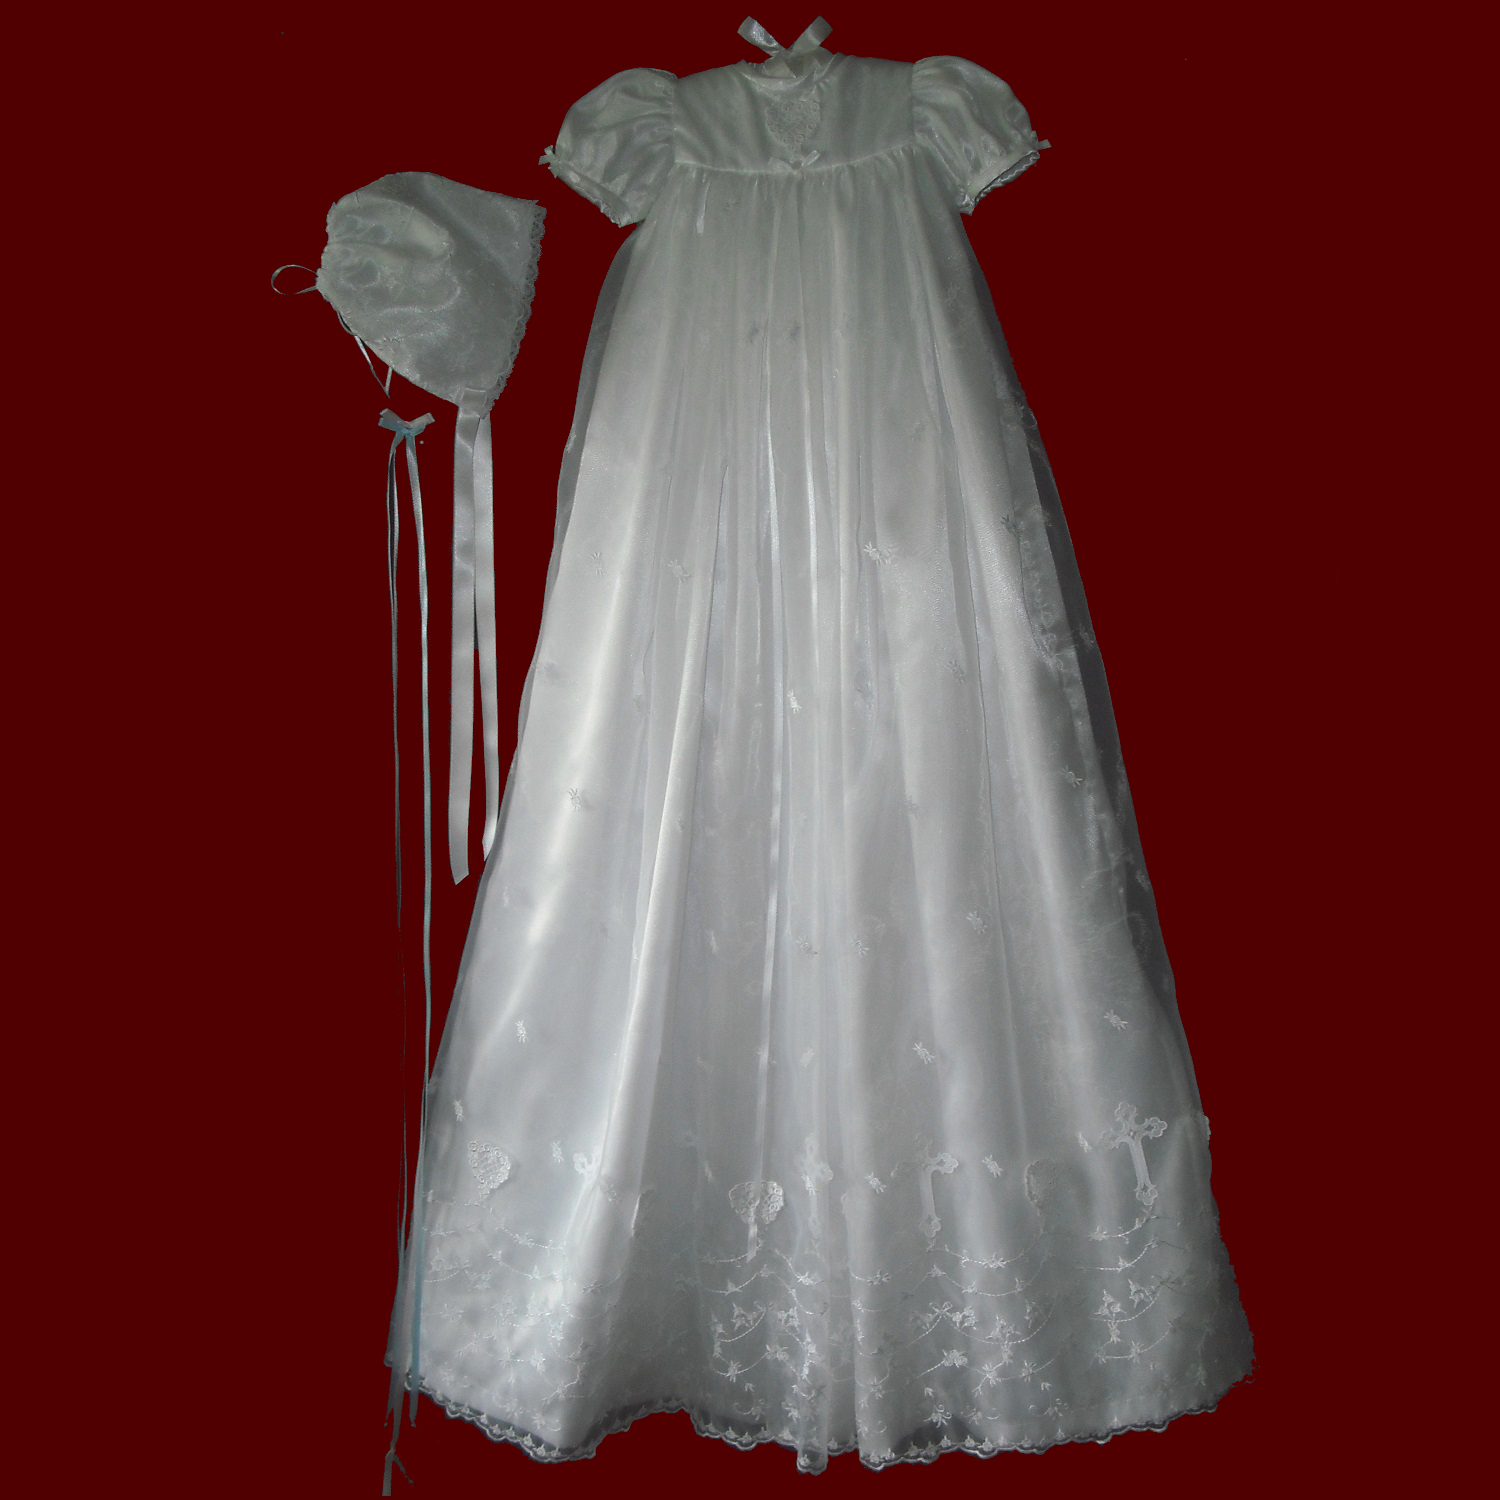 Scalloped Embroidered Organza with Crosses & Heart Christening Gown, Slip & Bonnet